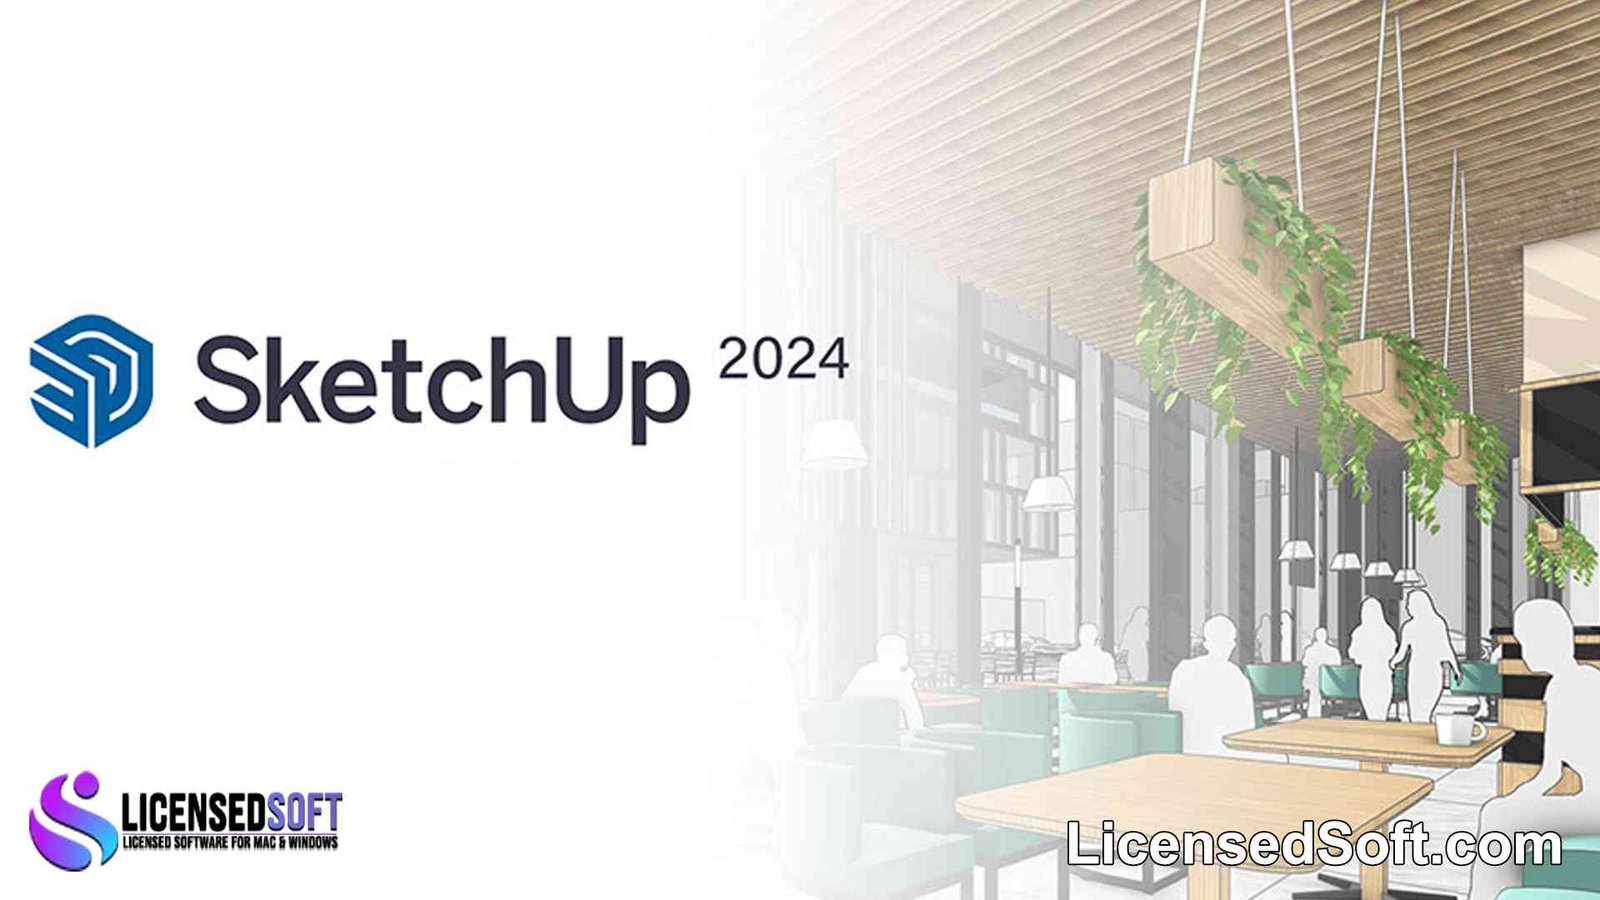 SketchUp Pro 2024 Perpetual License By LicensedSoft